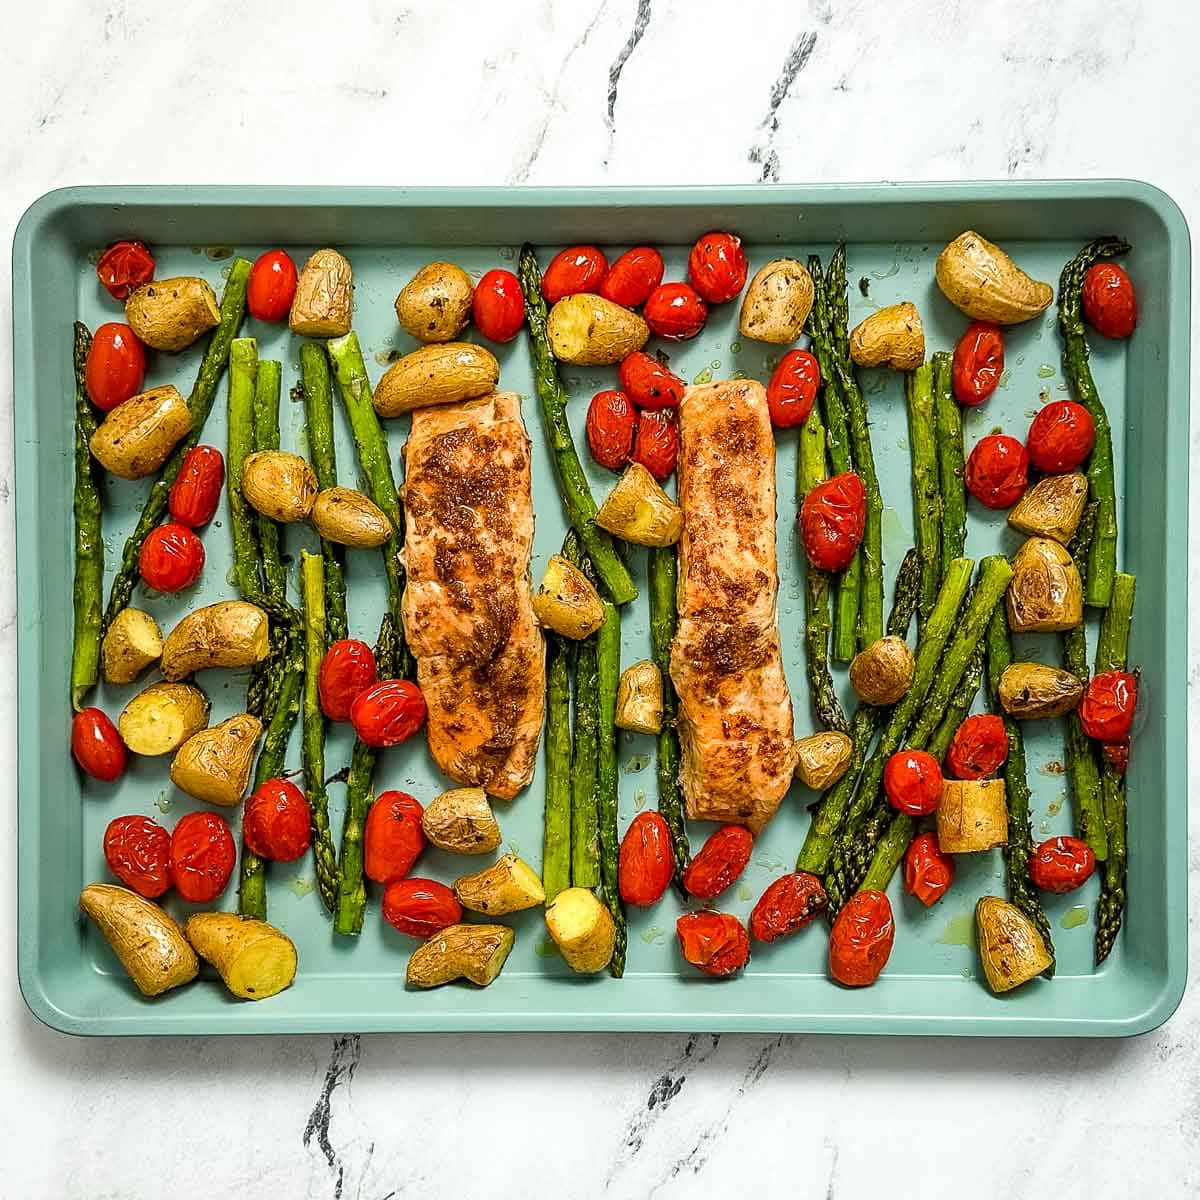 Overhead shot of roasted salmon, asparagus, fingerling potatoes, and cherry tomatoes on a blue sheet tray.